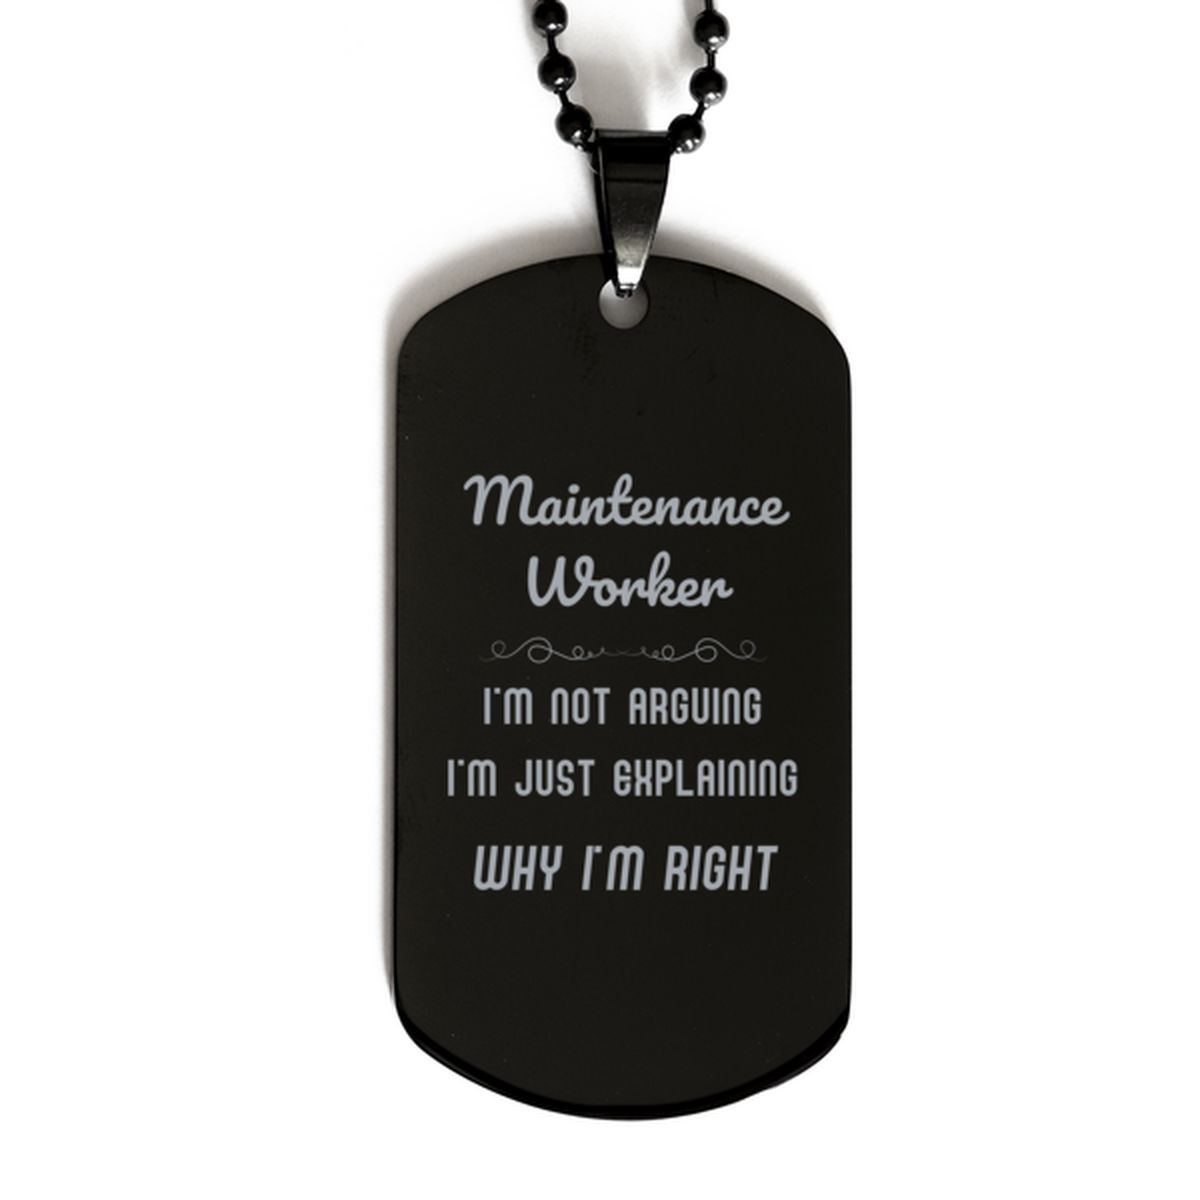 Maintenance Worker I'm not Arguing. I'm Just Explaining Why I'm RIGHT Black Dog Tag, Funny Saying Quote Maintenance Worker Gifts For Maintenance Worker Graduation Birthday Christmas Gifts for Men Women Coworker